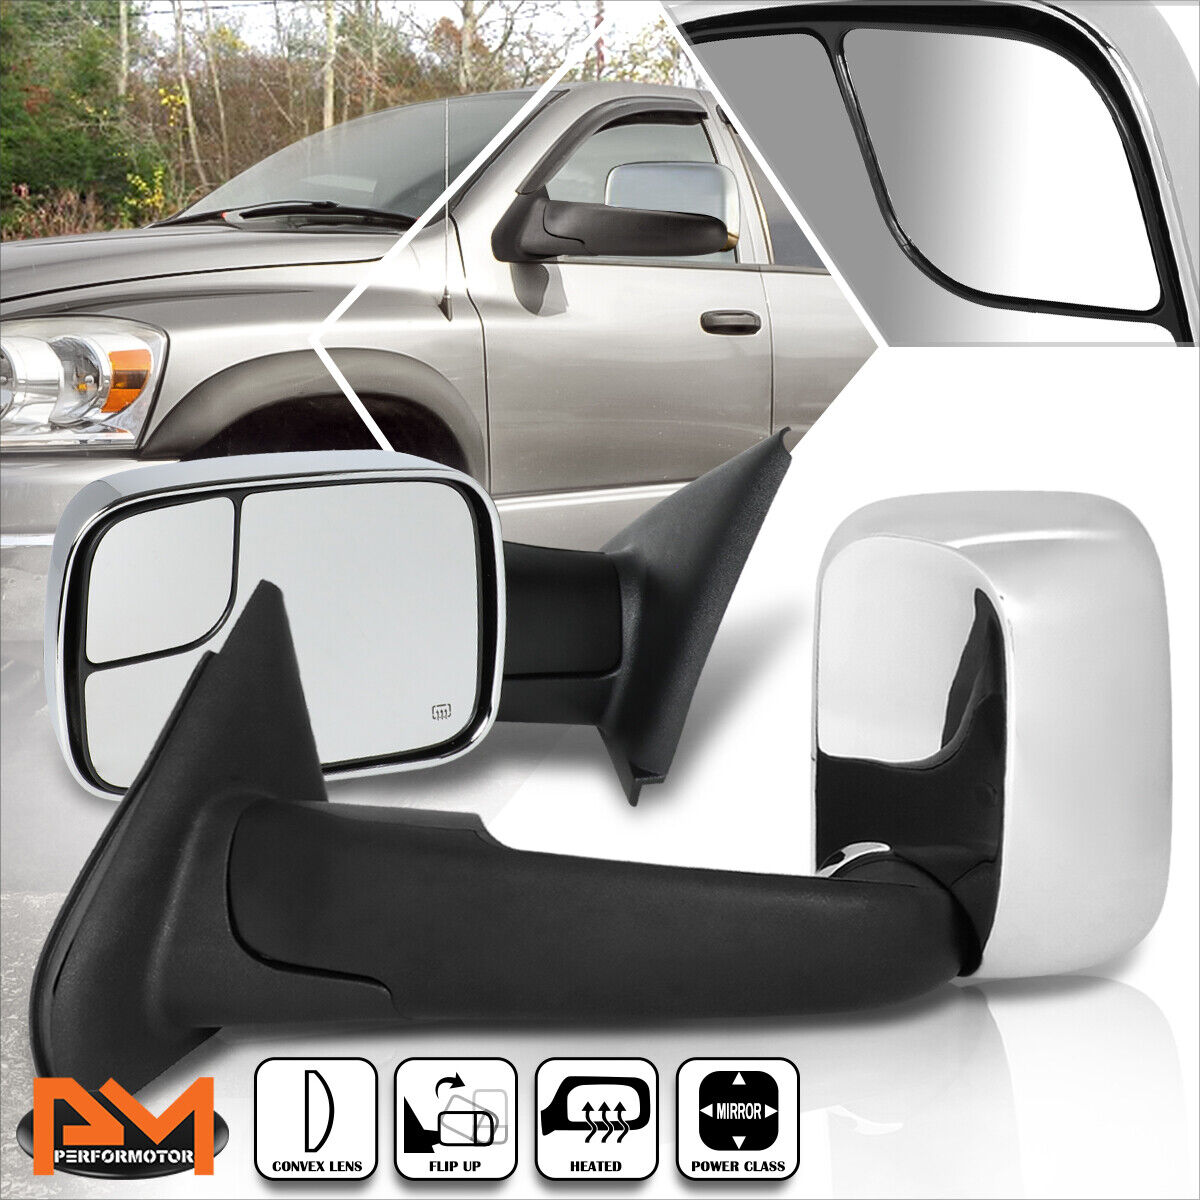 For 02-09 Dodge Ram 1500/2500/3500 Powered+Heated Chrome Side Towing Mirror Pair